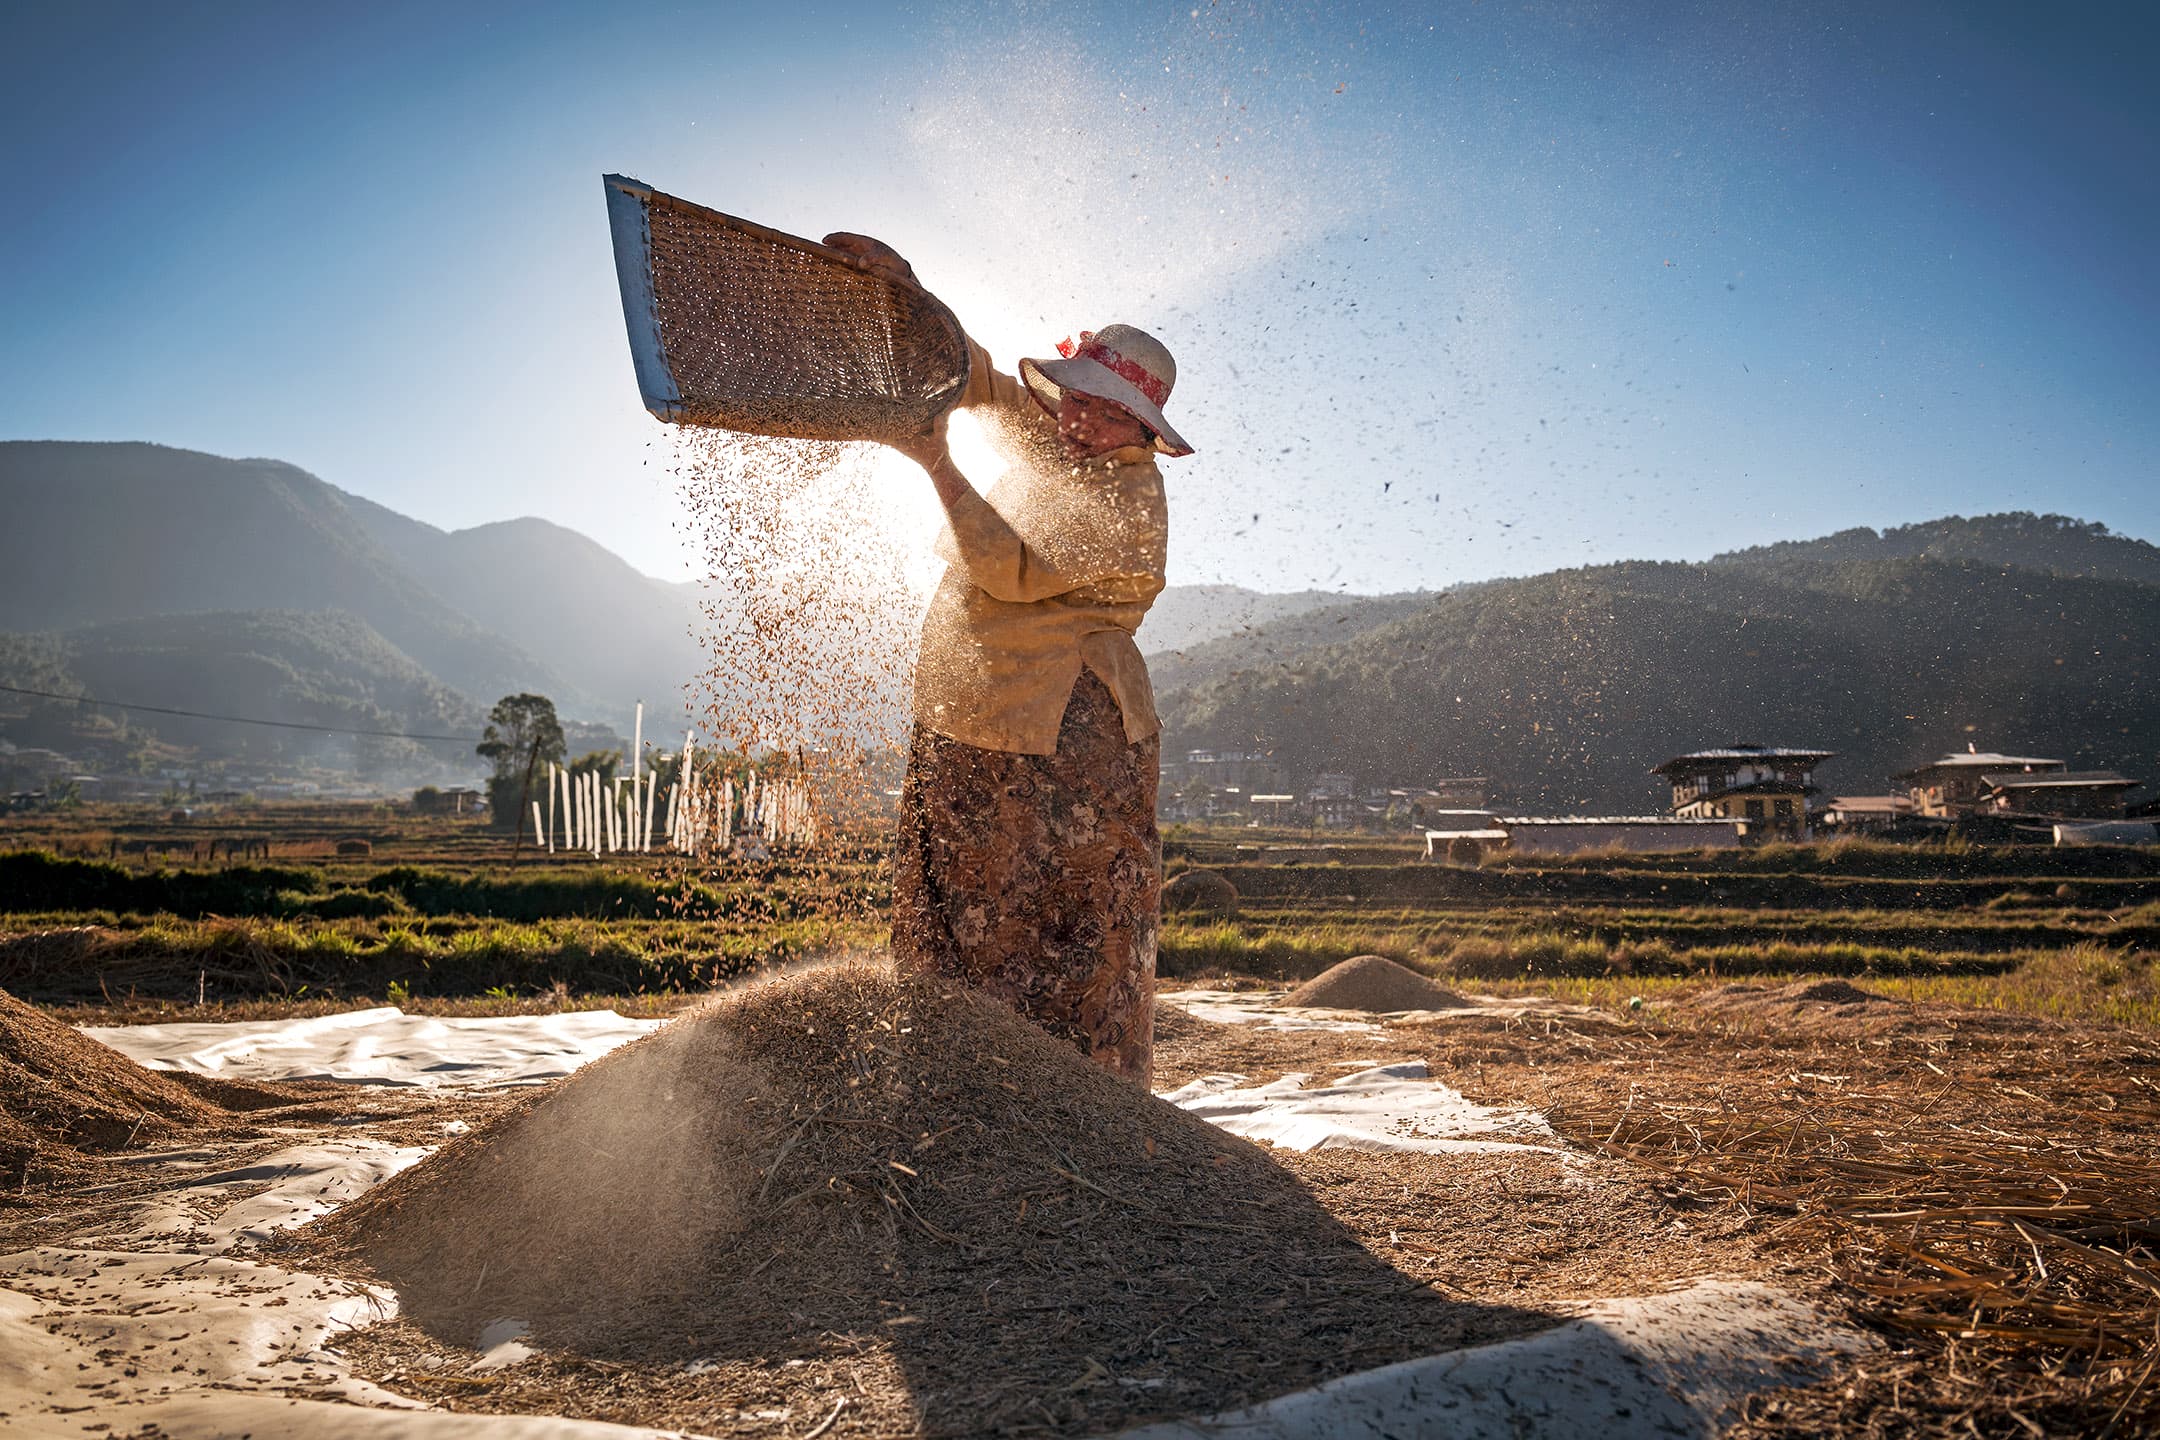 A woman manually separates rice from the husk in a field outside Punakha, Bhutan on December 11, 2017.  Bhutan is a nation at a crossroads, aiming to preserve its deep cultural heritage while still cautiously opening itself up to modernity.  Still, farming plays a critical role in the nation’s economy with at least 80% of all Bhutanese being involved in the agricultural sector.  The photographer did not influence the scene or circumstances of this photograph.  The woman was performing this task in the field; the photographer did not influence the scene or circumstances of this photograph.